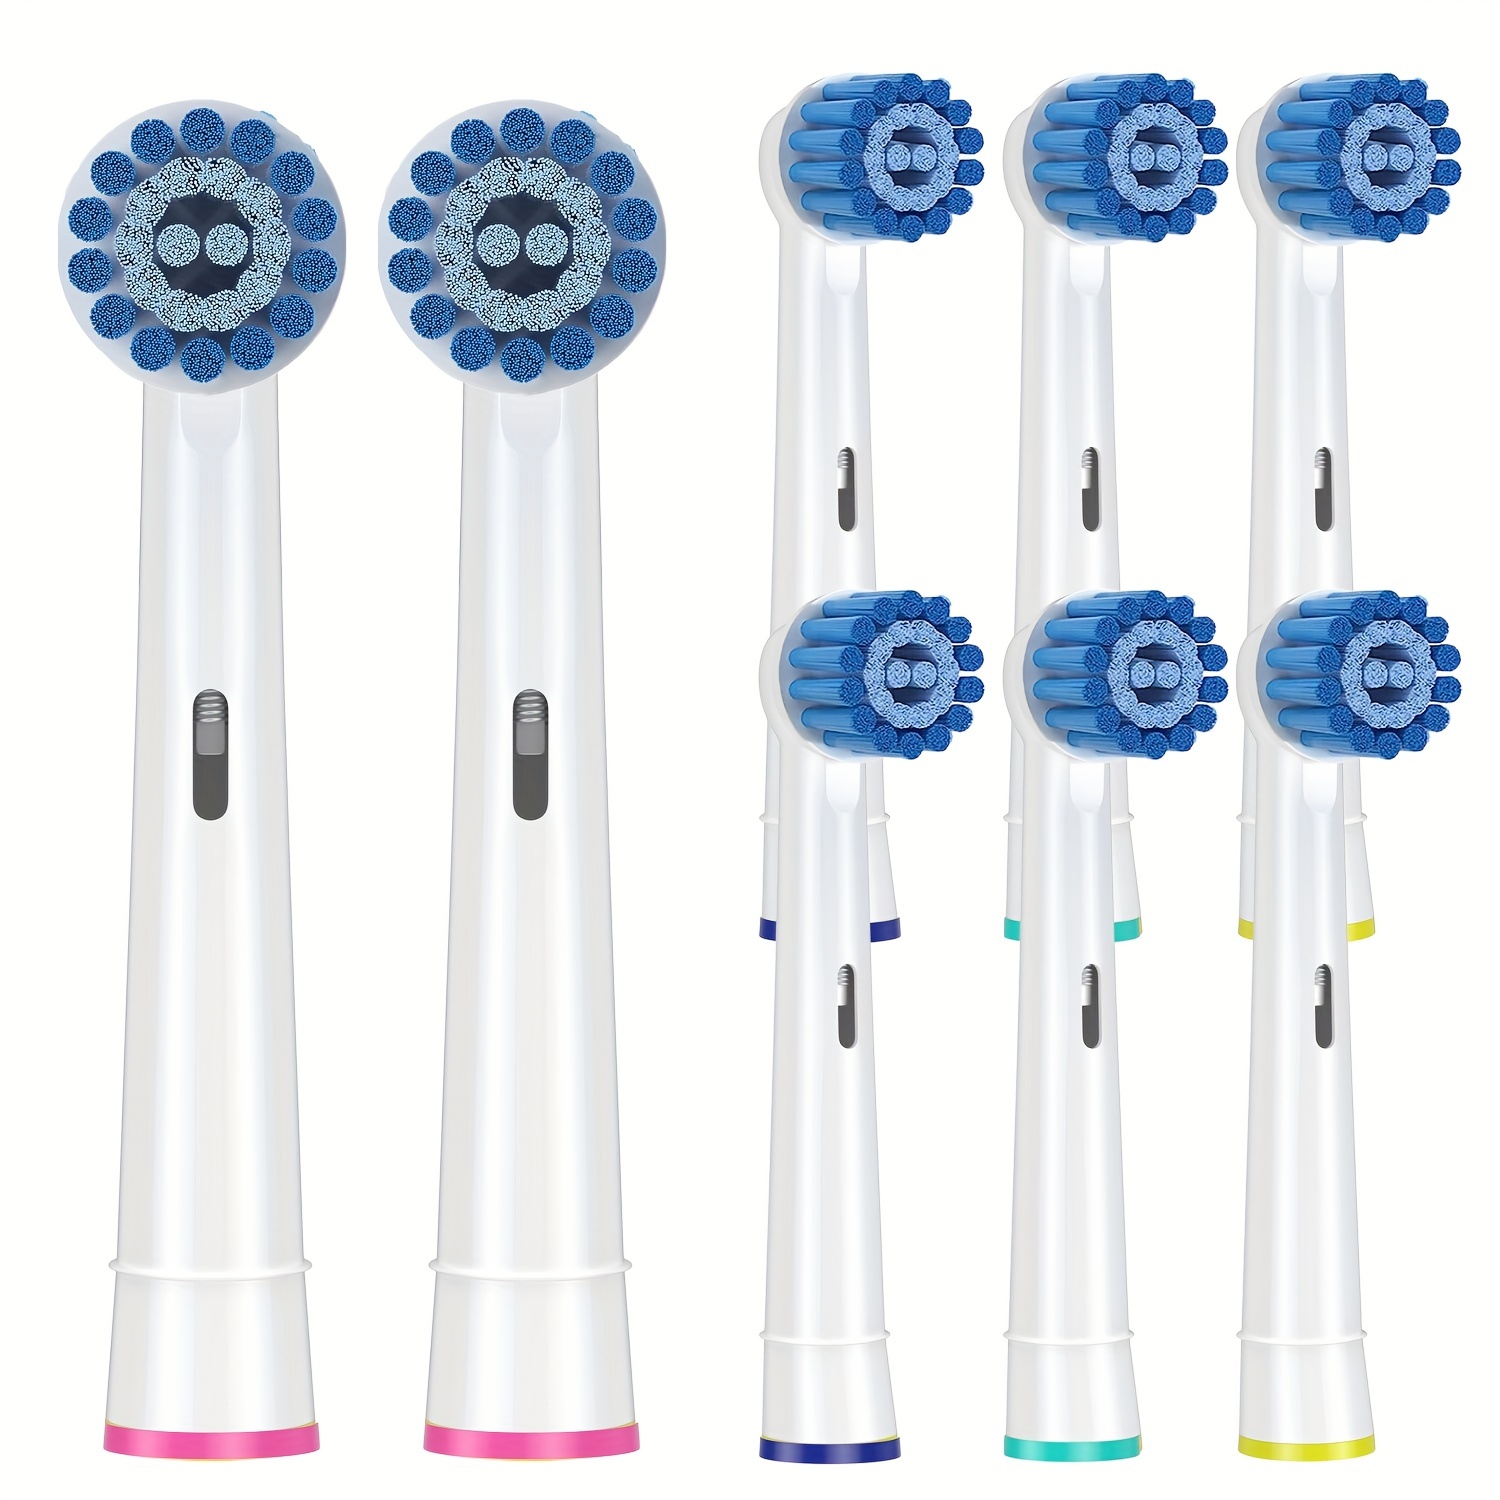 

8 Pack Sensitive Gum Care Replacement Brush Heads Compatible With Oral B Braun Electric Toothbrush. Soft Bristle For Superior And Gentle Clean